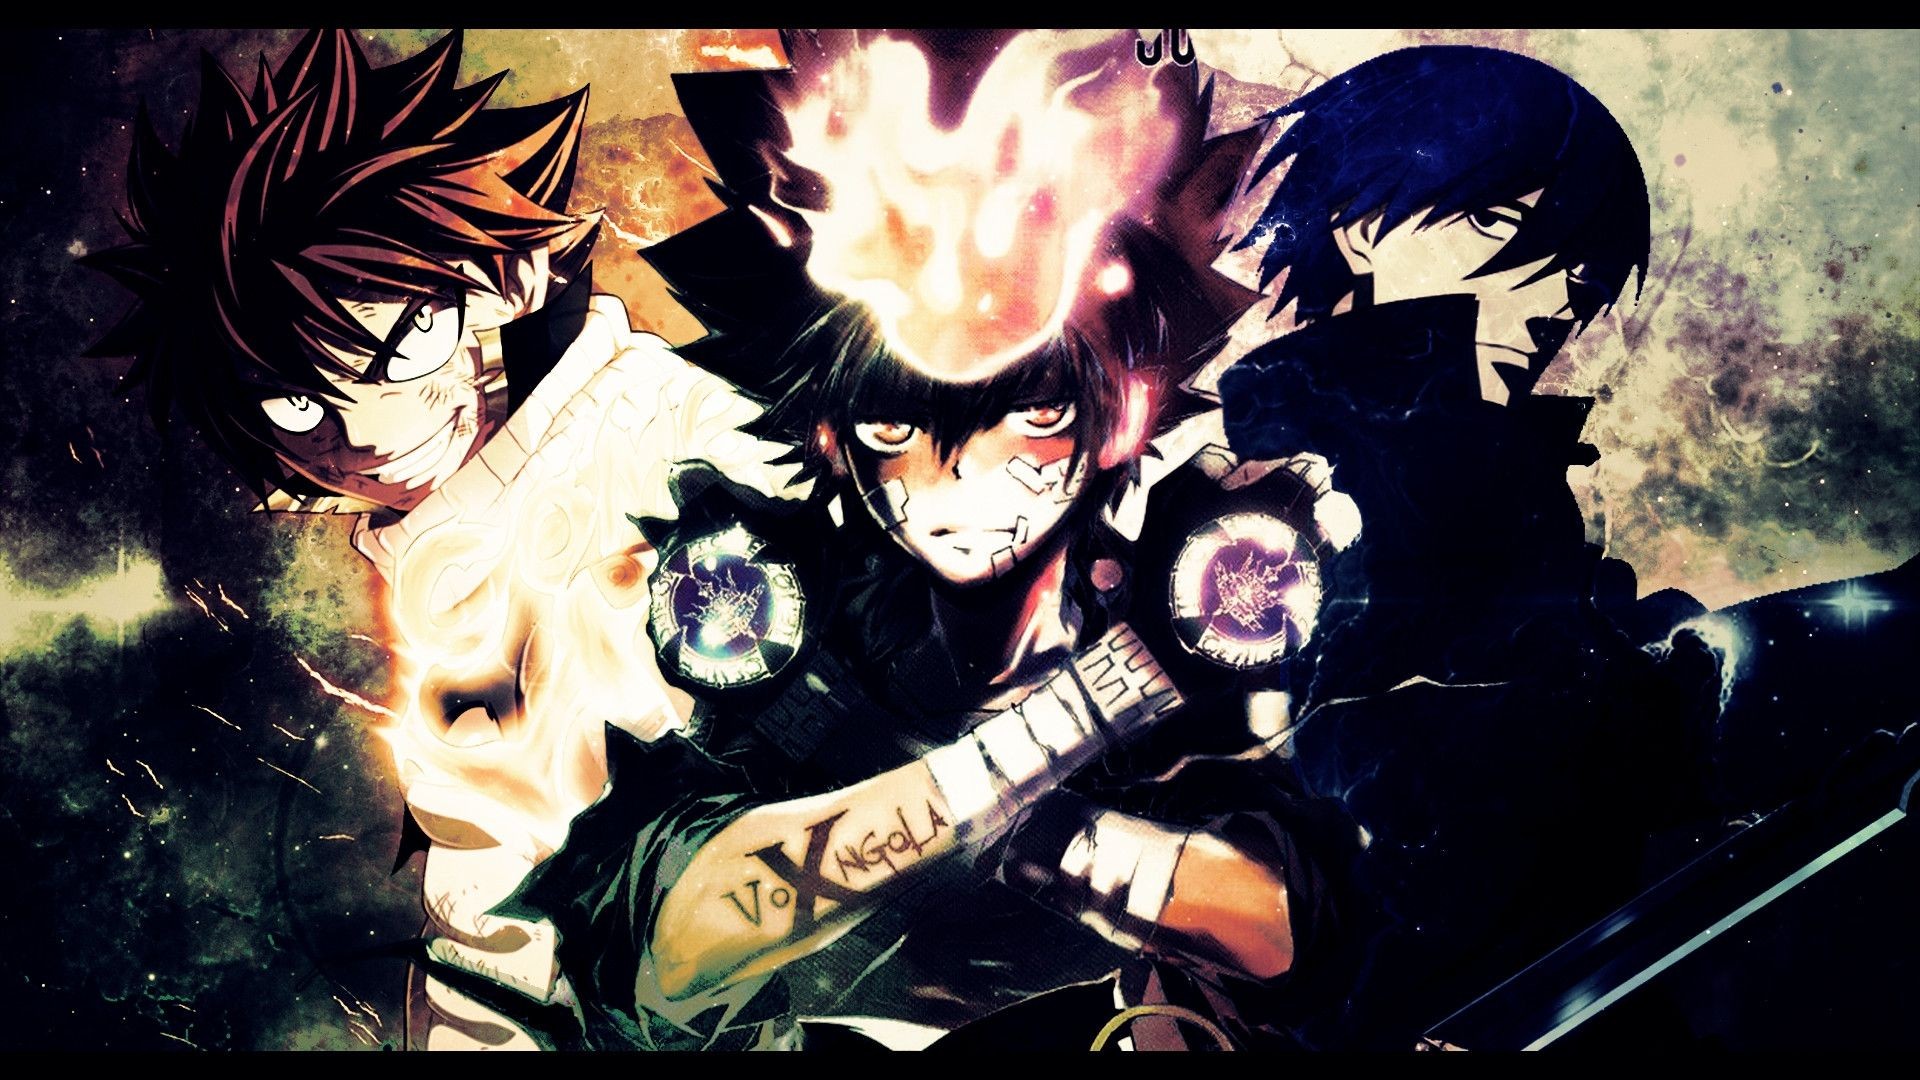 Epic Anime wallpaper ·① Download free stunning backgrounds ...